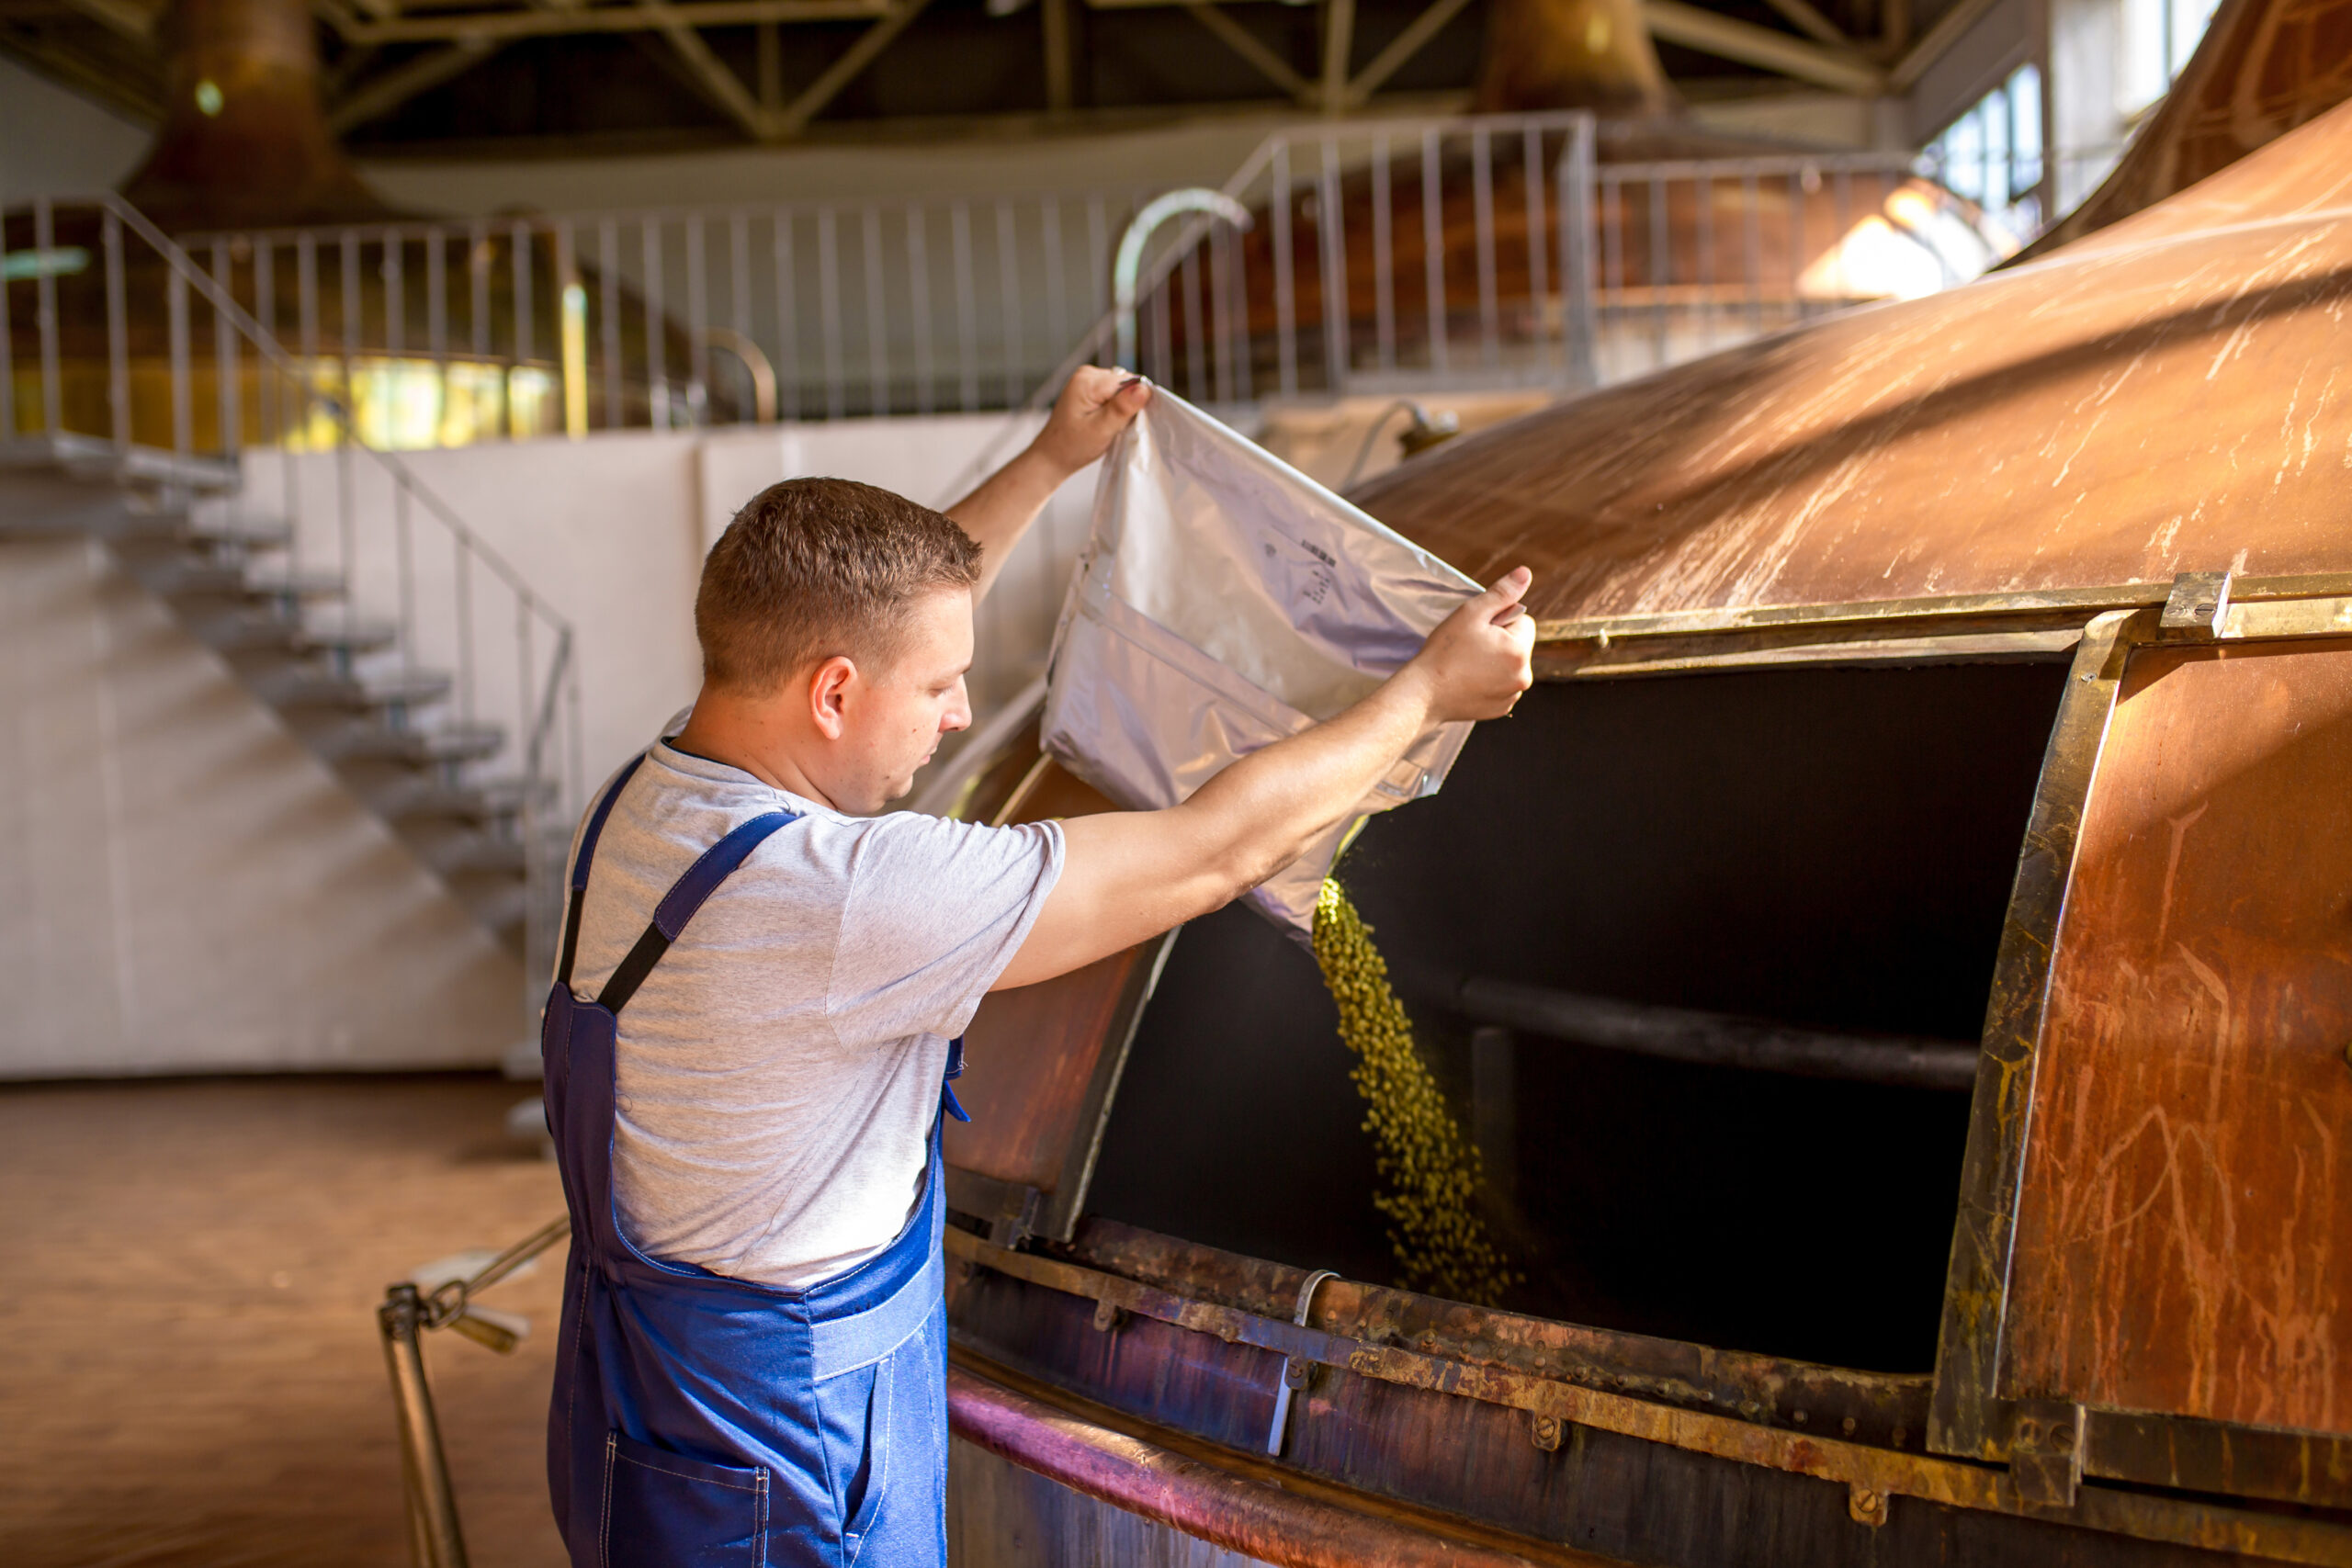 Worker pours ingredients into a brewing tank.